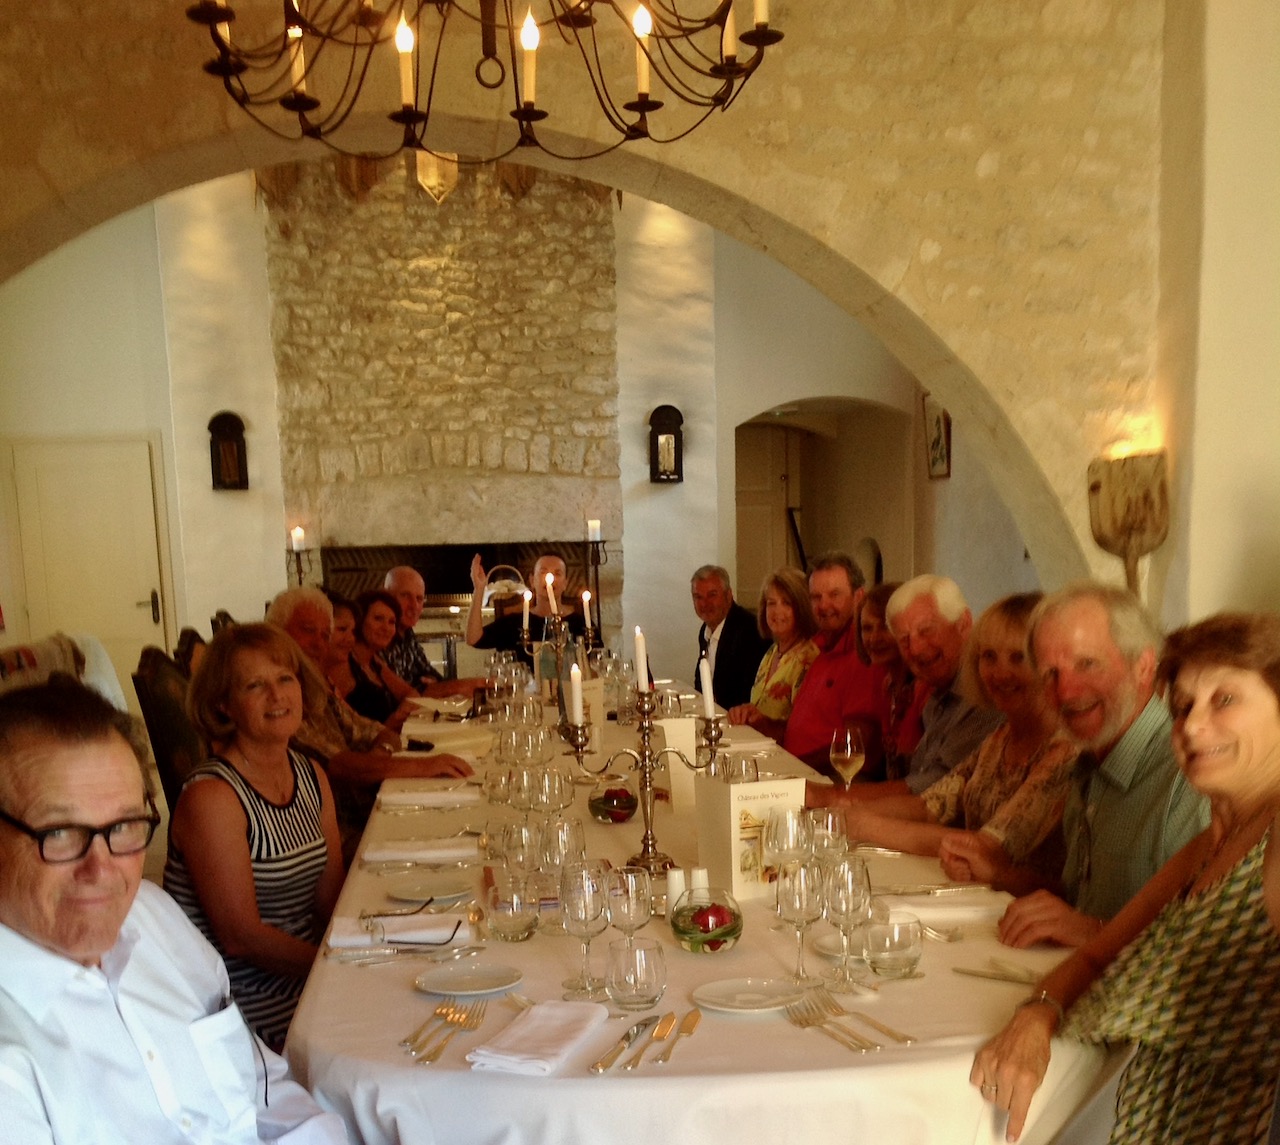 Private dining at Chateau des Vigiers